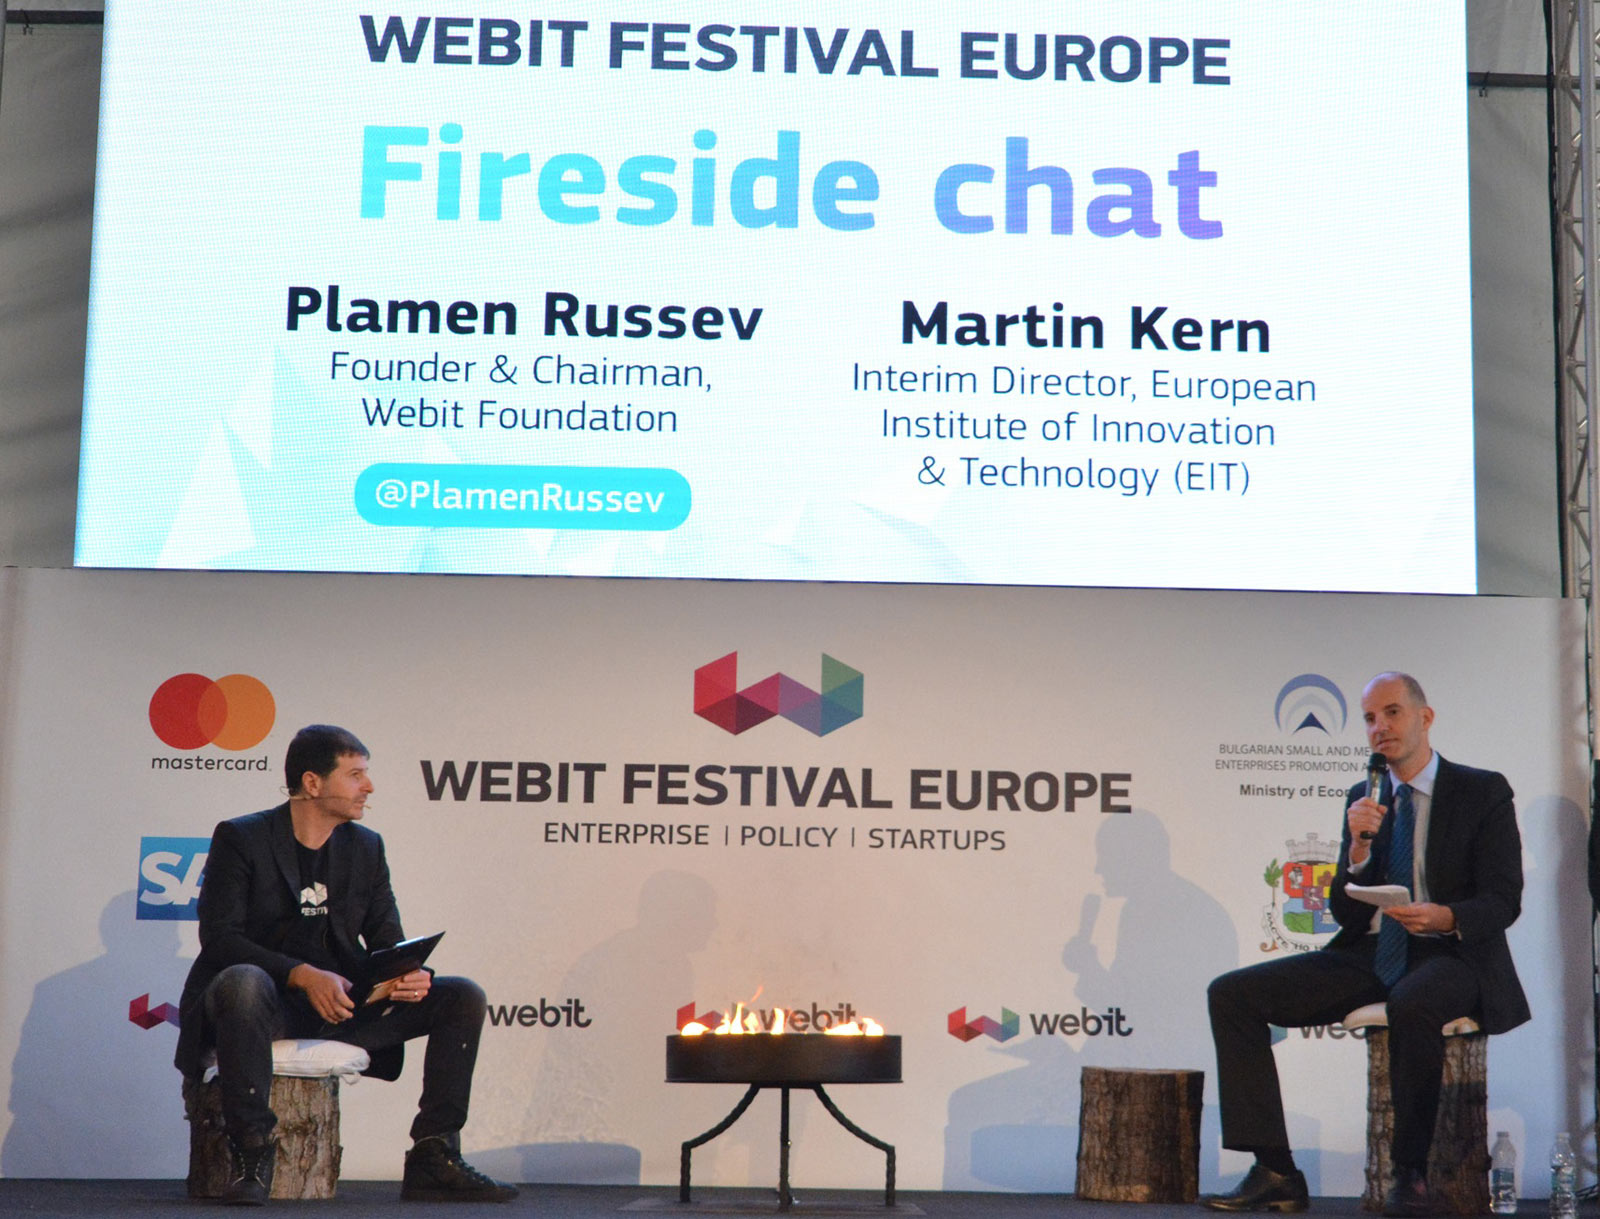 Plamen Russev in a fireside chat with the Director of the European Institute of Innovation and Technology (EIT)